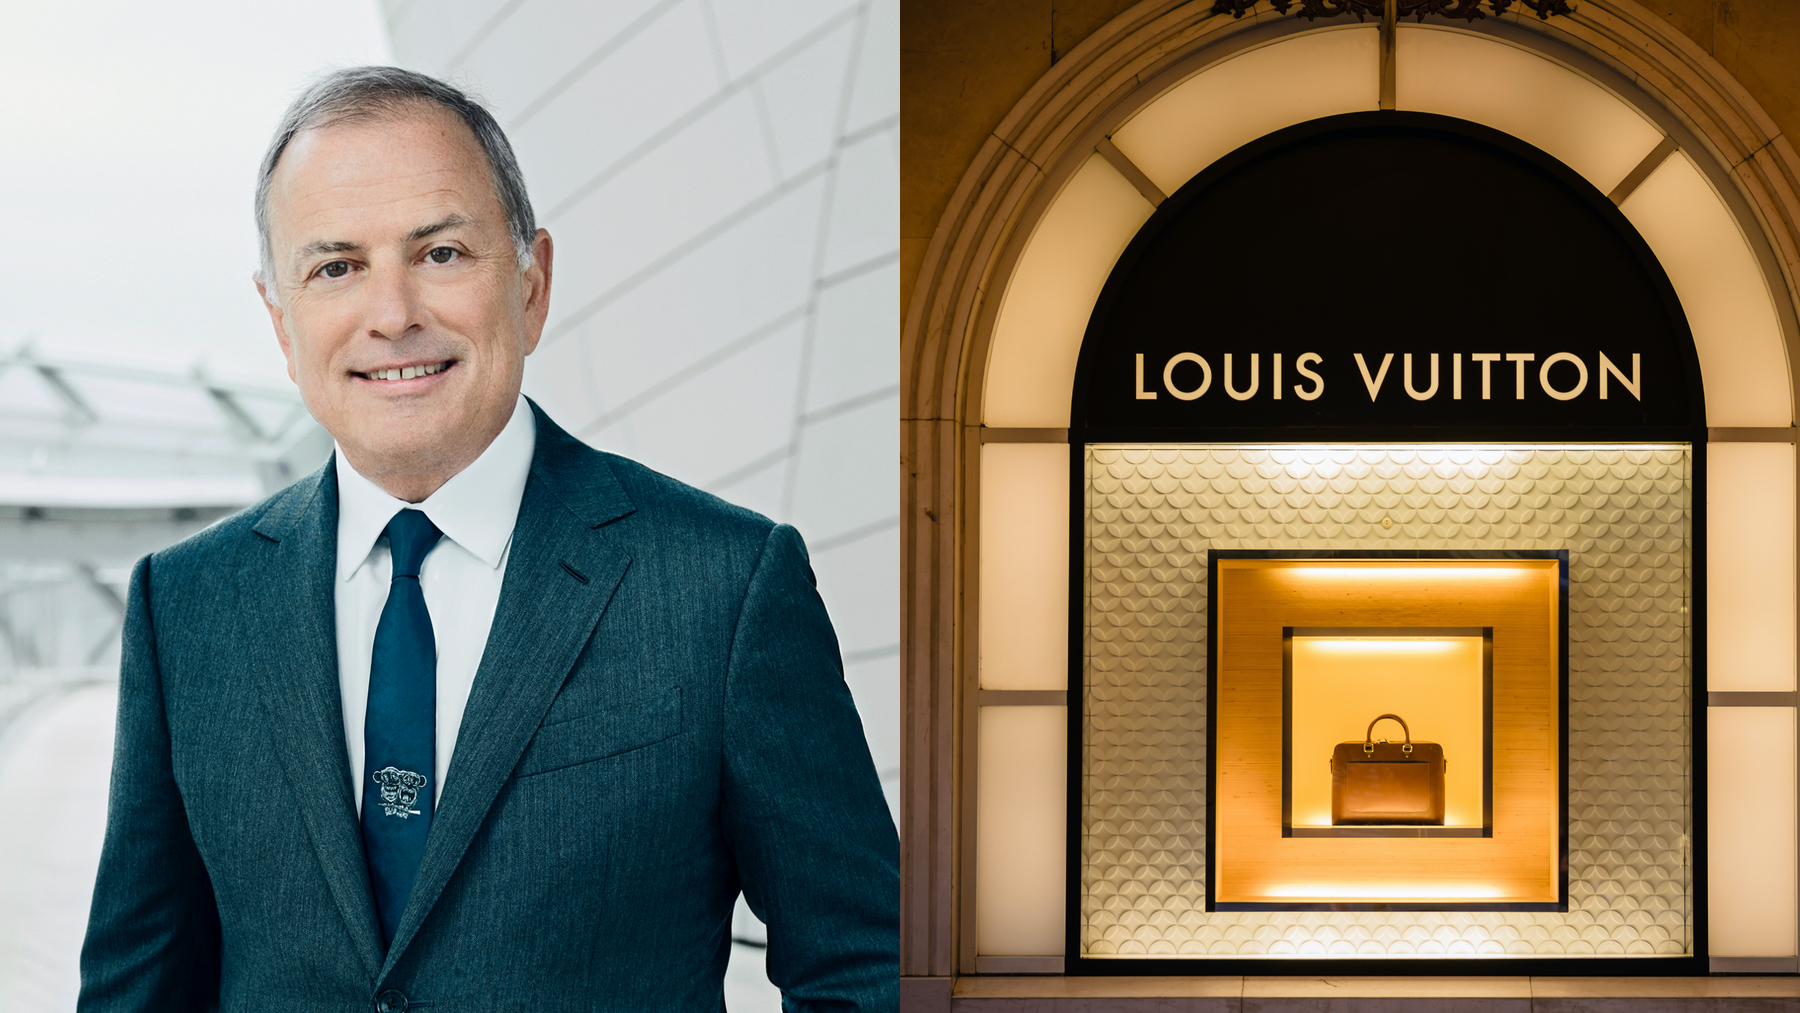 louis vuitton who is the owner of dior